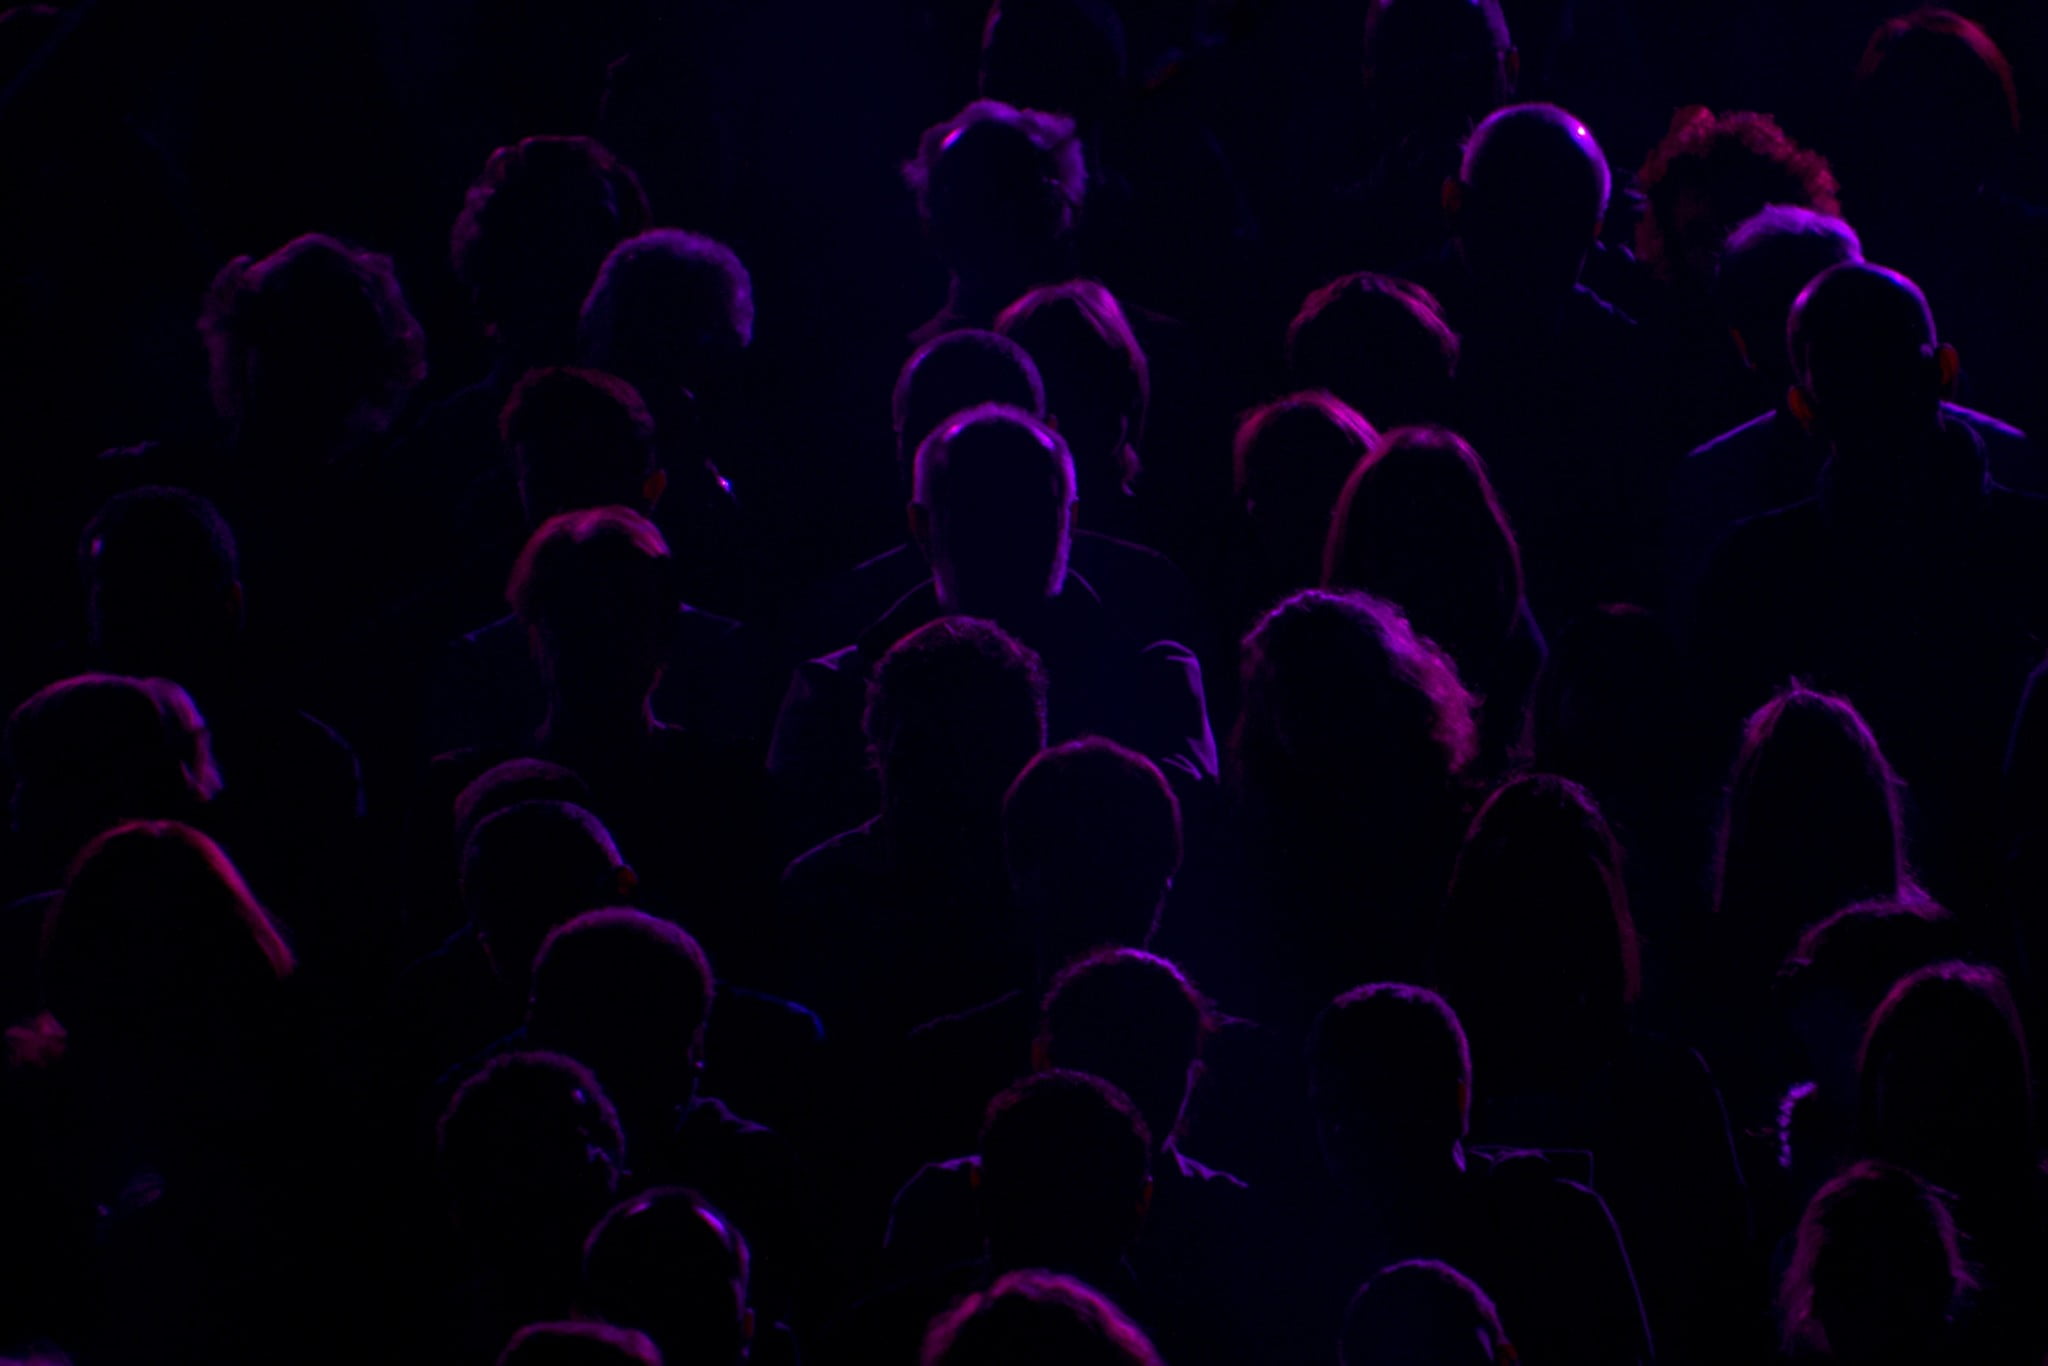 opioid concept: dim silhouettes lit with purple-red light